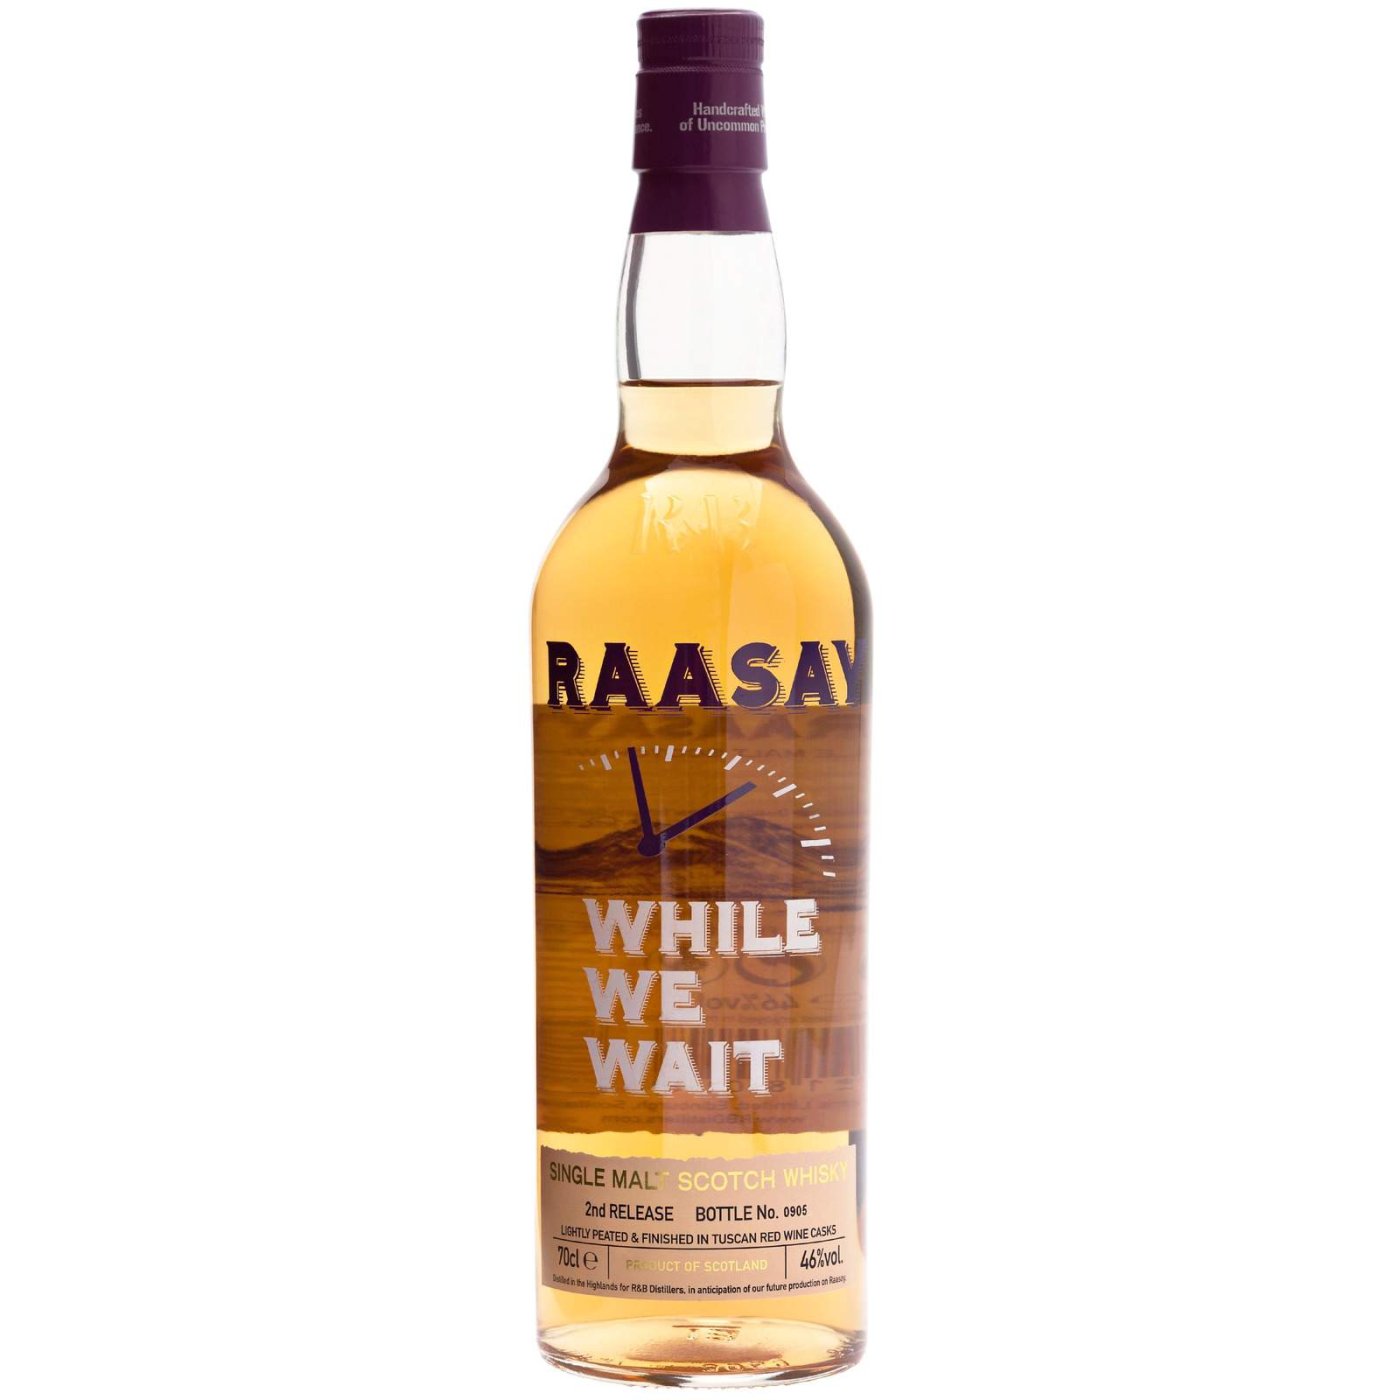 Raasay - While we Wait 2nd Release 70cl